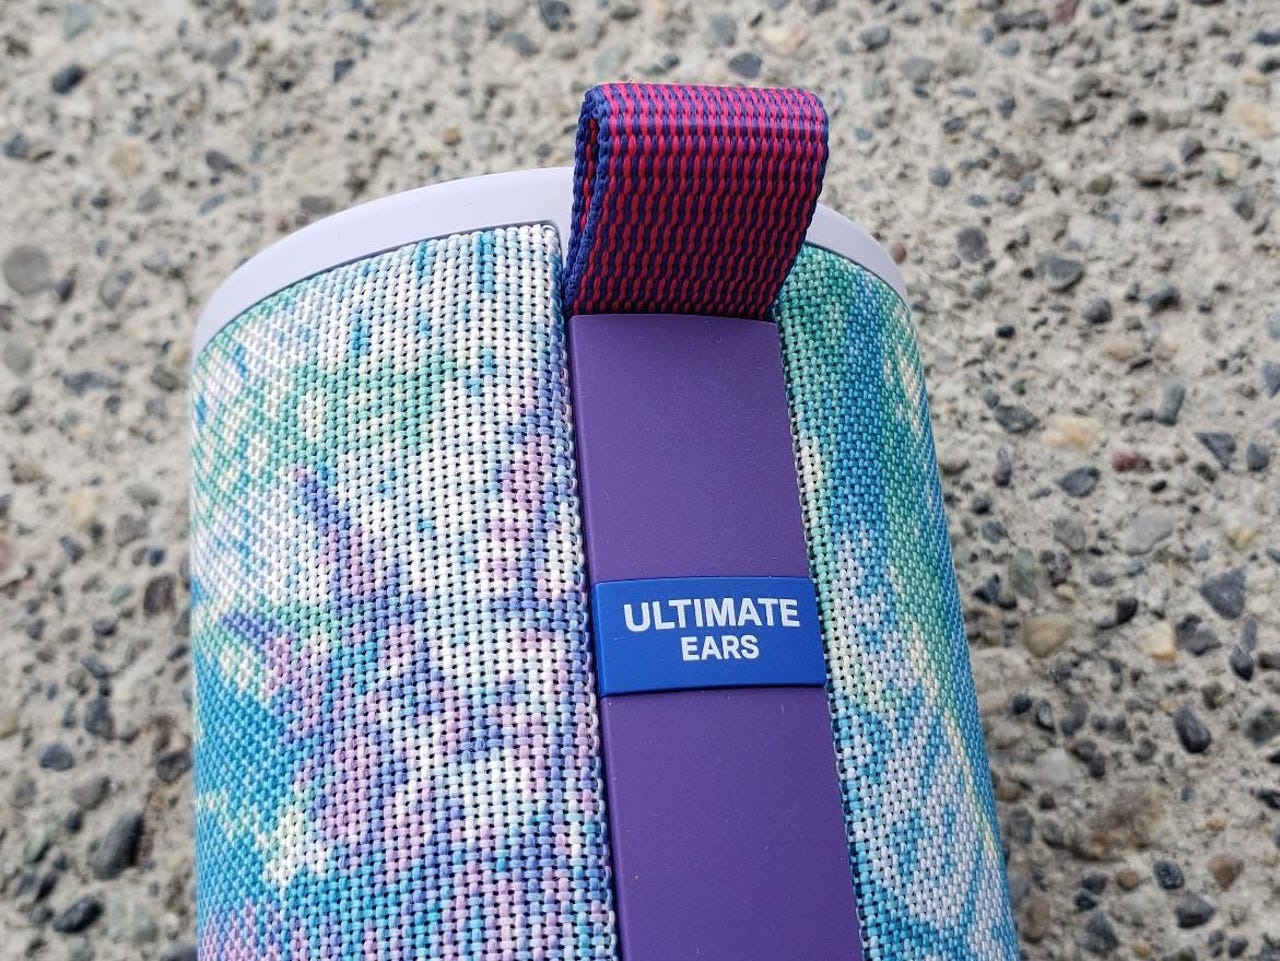 Ultimate Ears myBOOM 3 speaker hands-on: Thousands of ways to